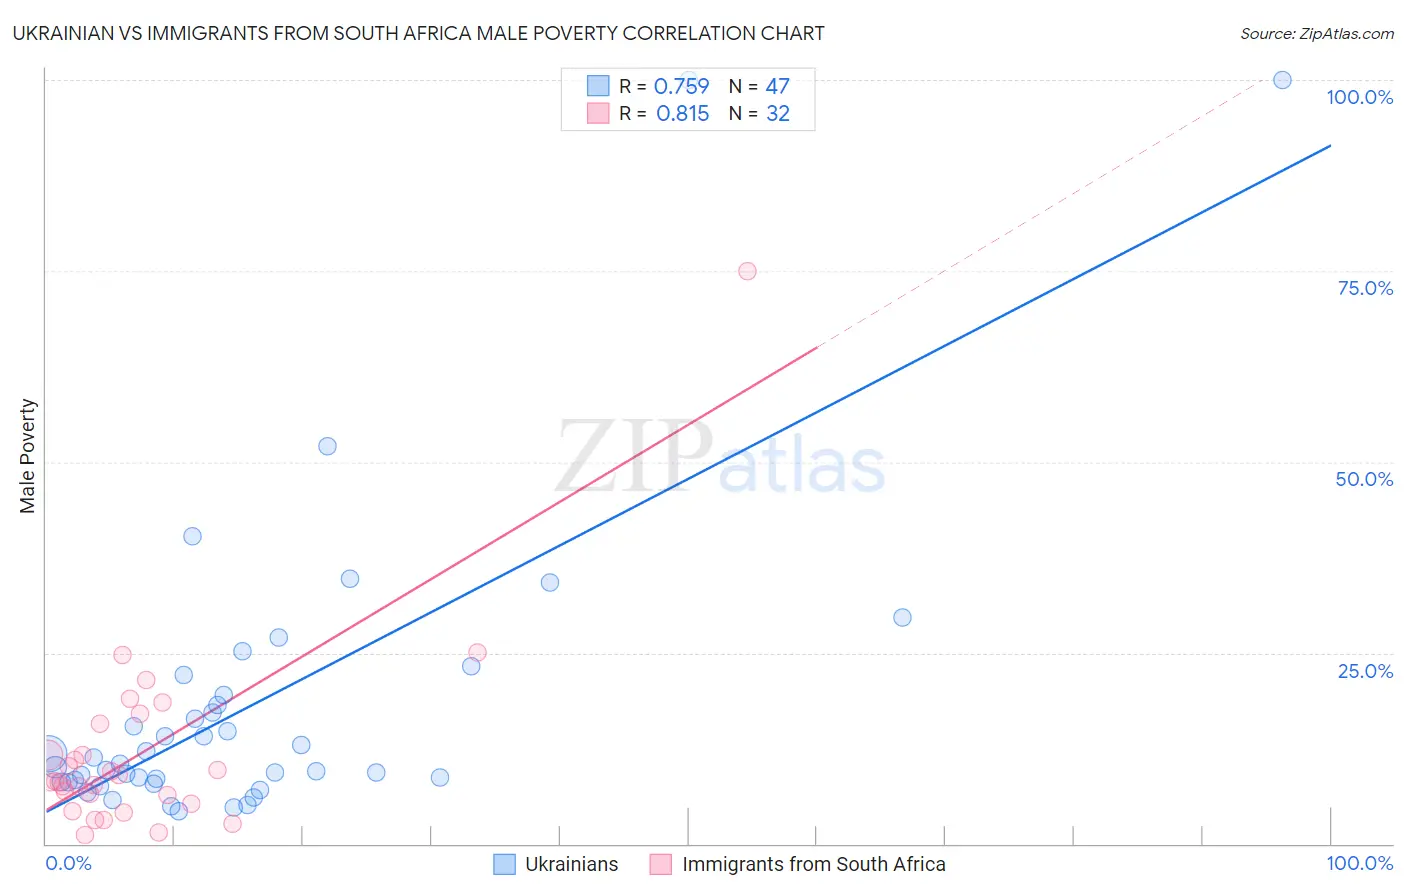 Ukrainian vs Immigrants from South Africa Male Poverty